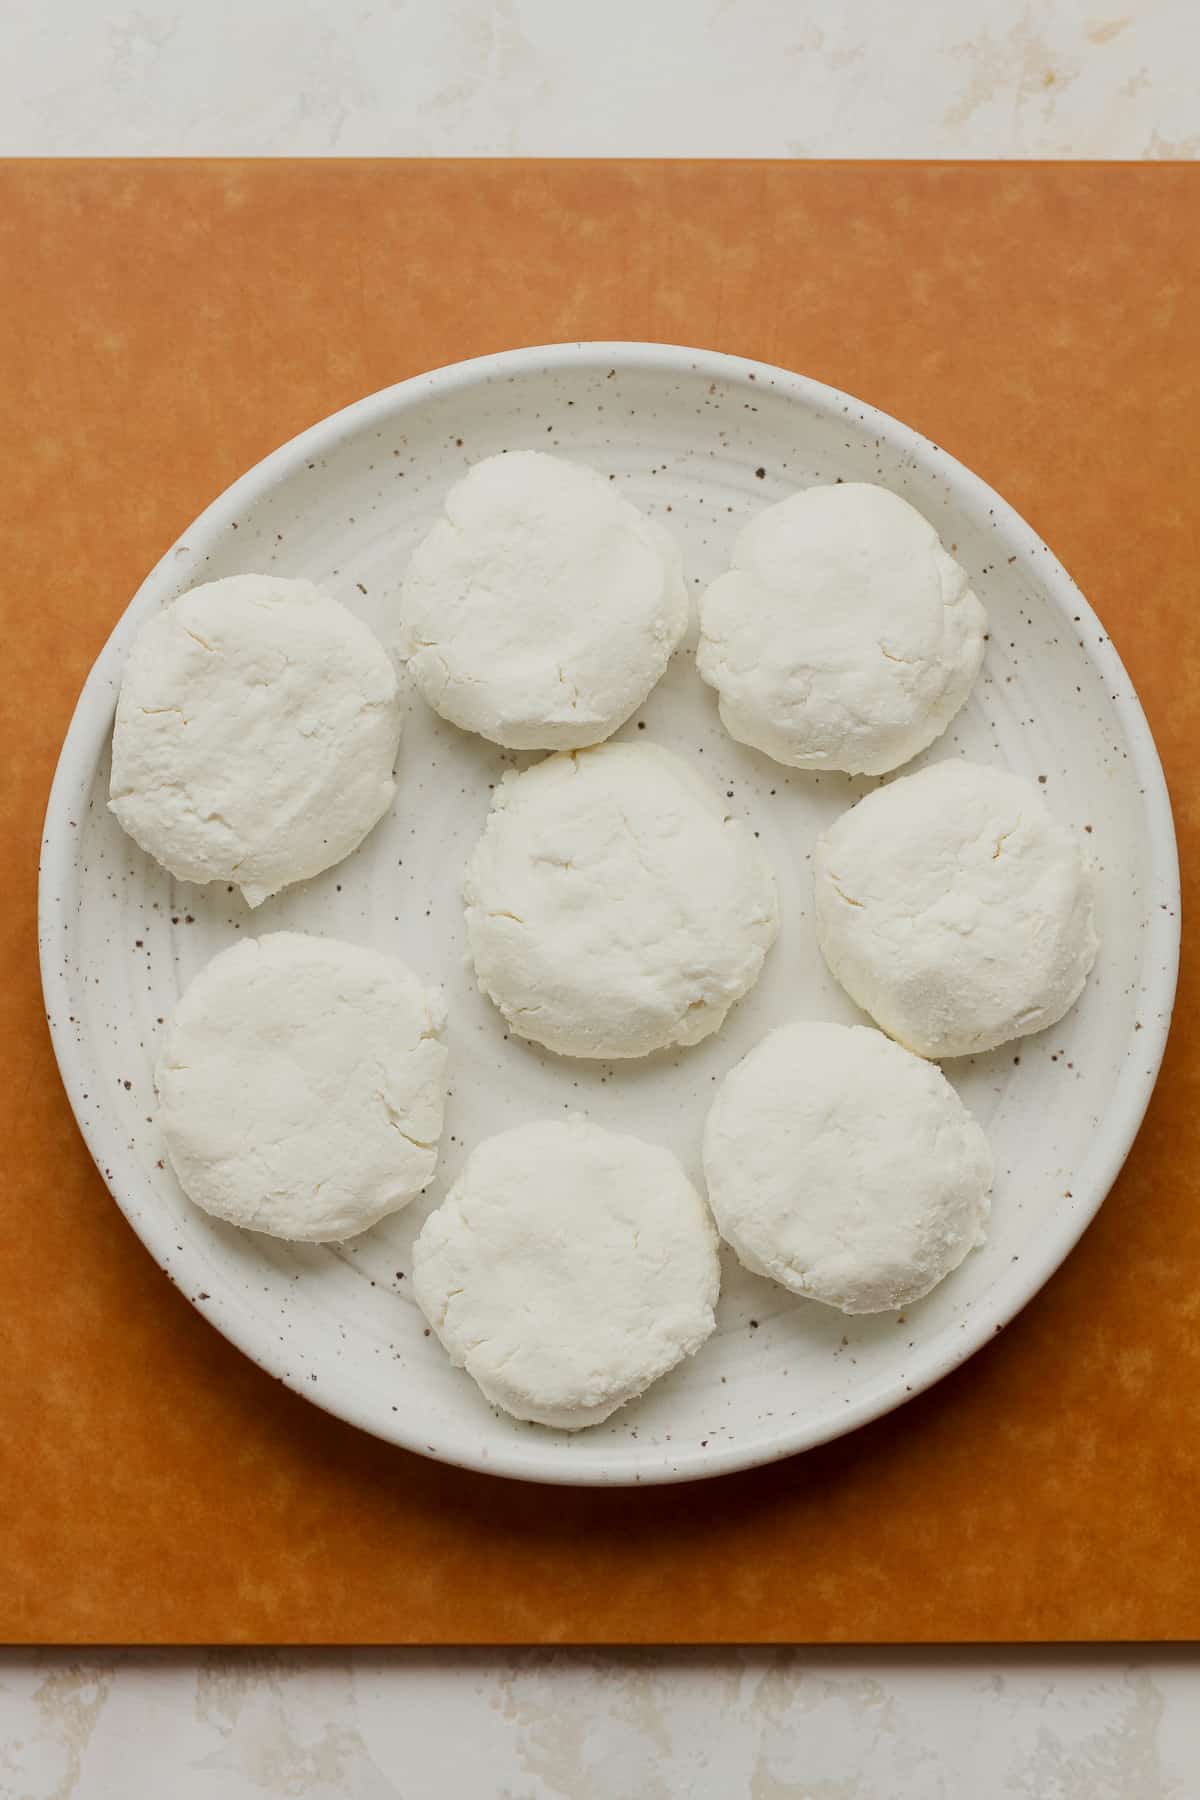 A plate of the rounds of goat cheese before adding the breading.